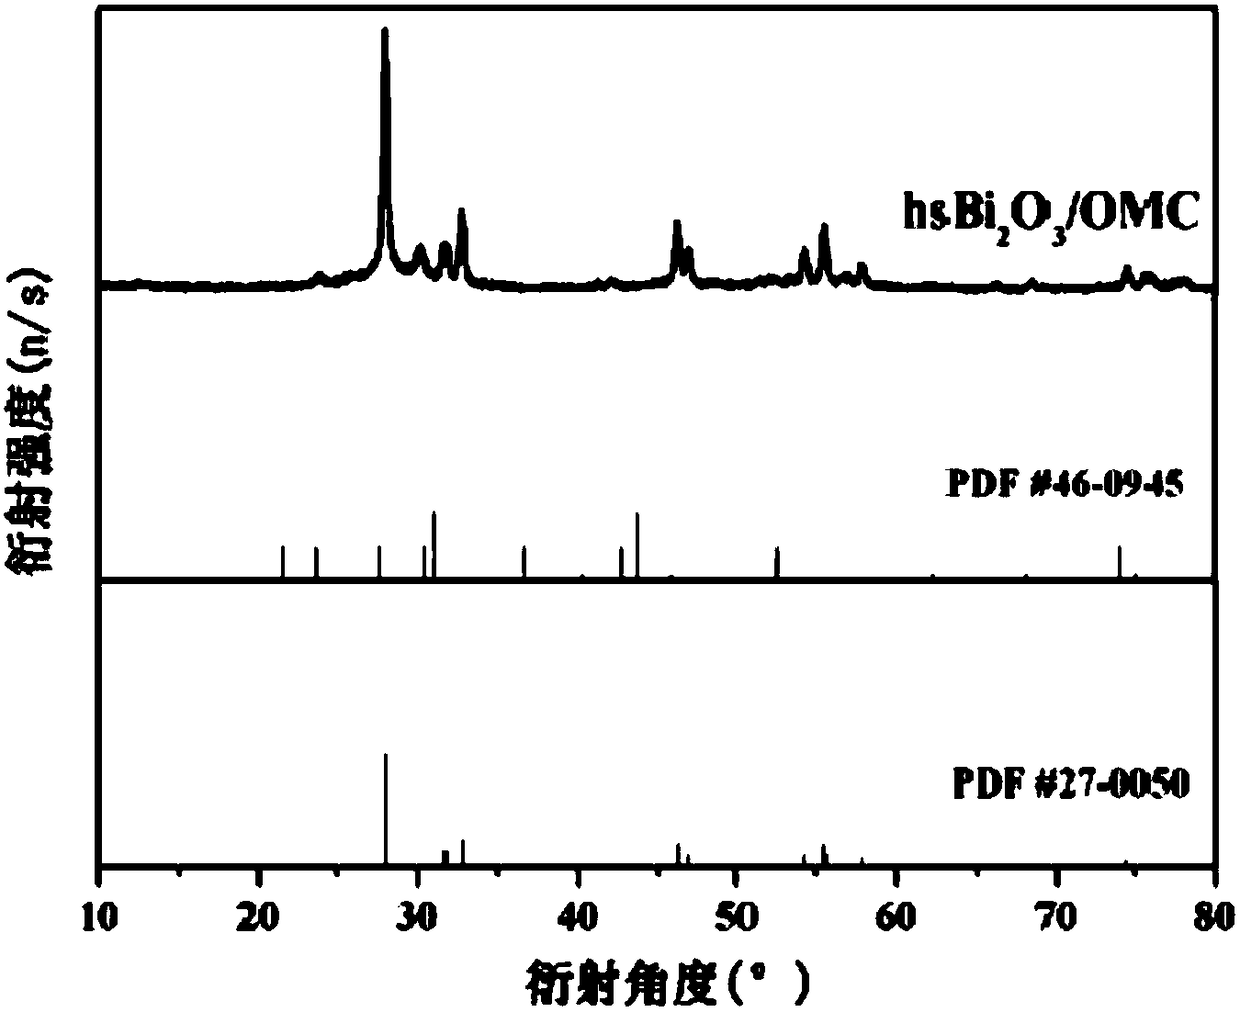 Hollow spherical bismuth oxide supported ordered mesoporous carbon as well as preparation method and application thereof